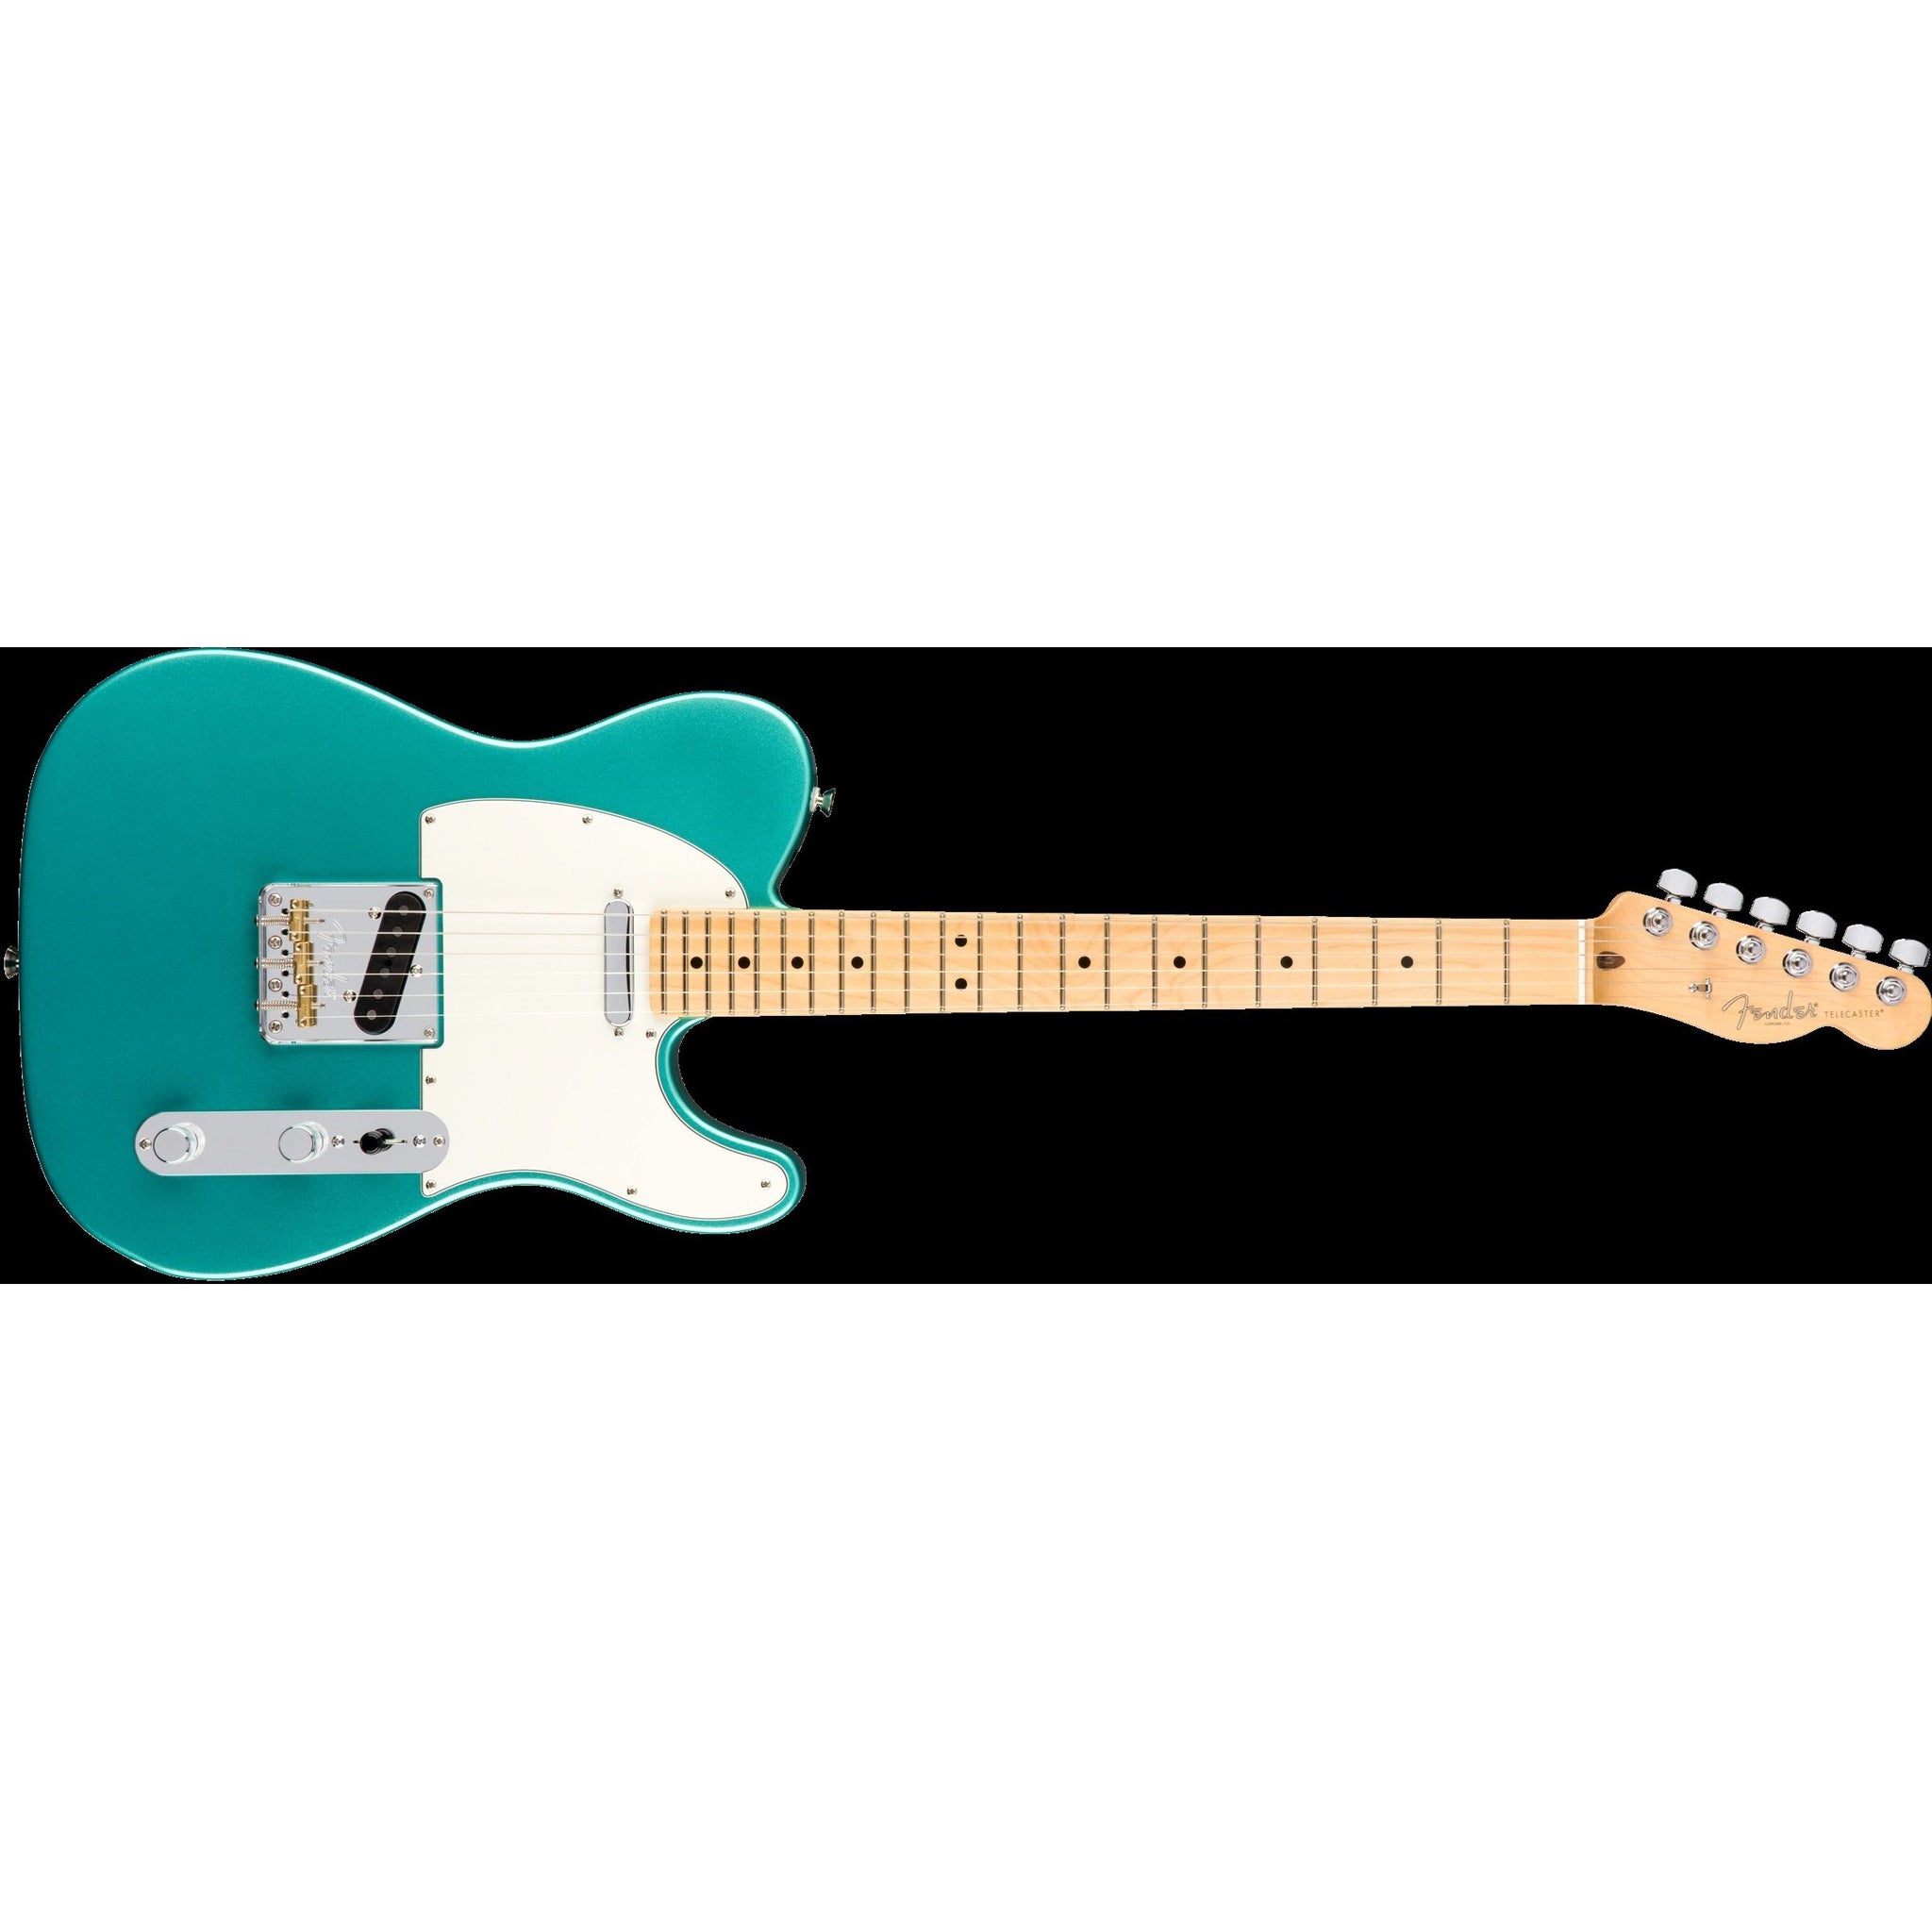 Fender American Professional Telecaster Electric Guitar with Hardshell Case-Mystic Seafoam (Discontinued)-Music World Academy